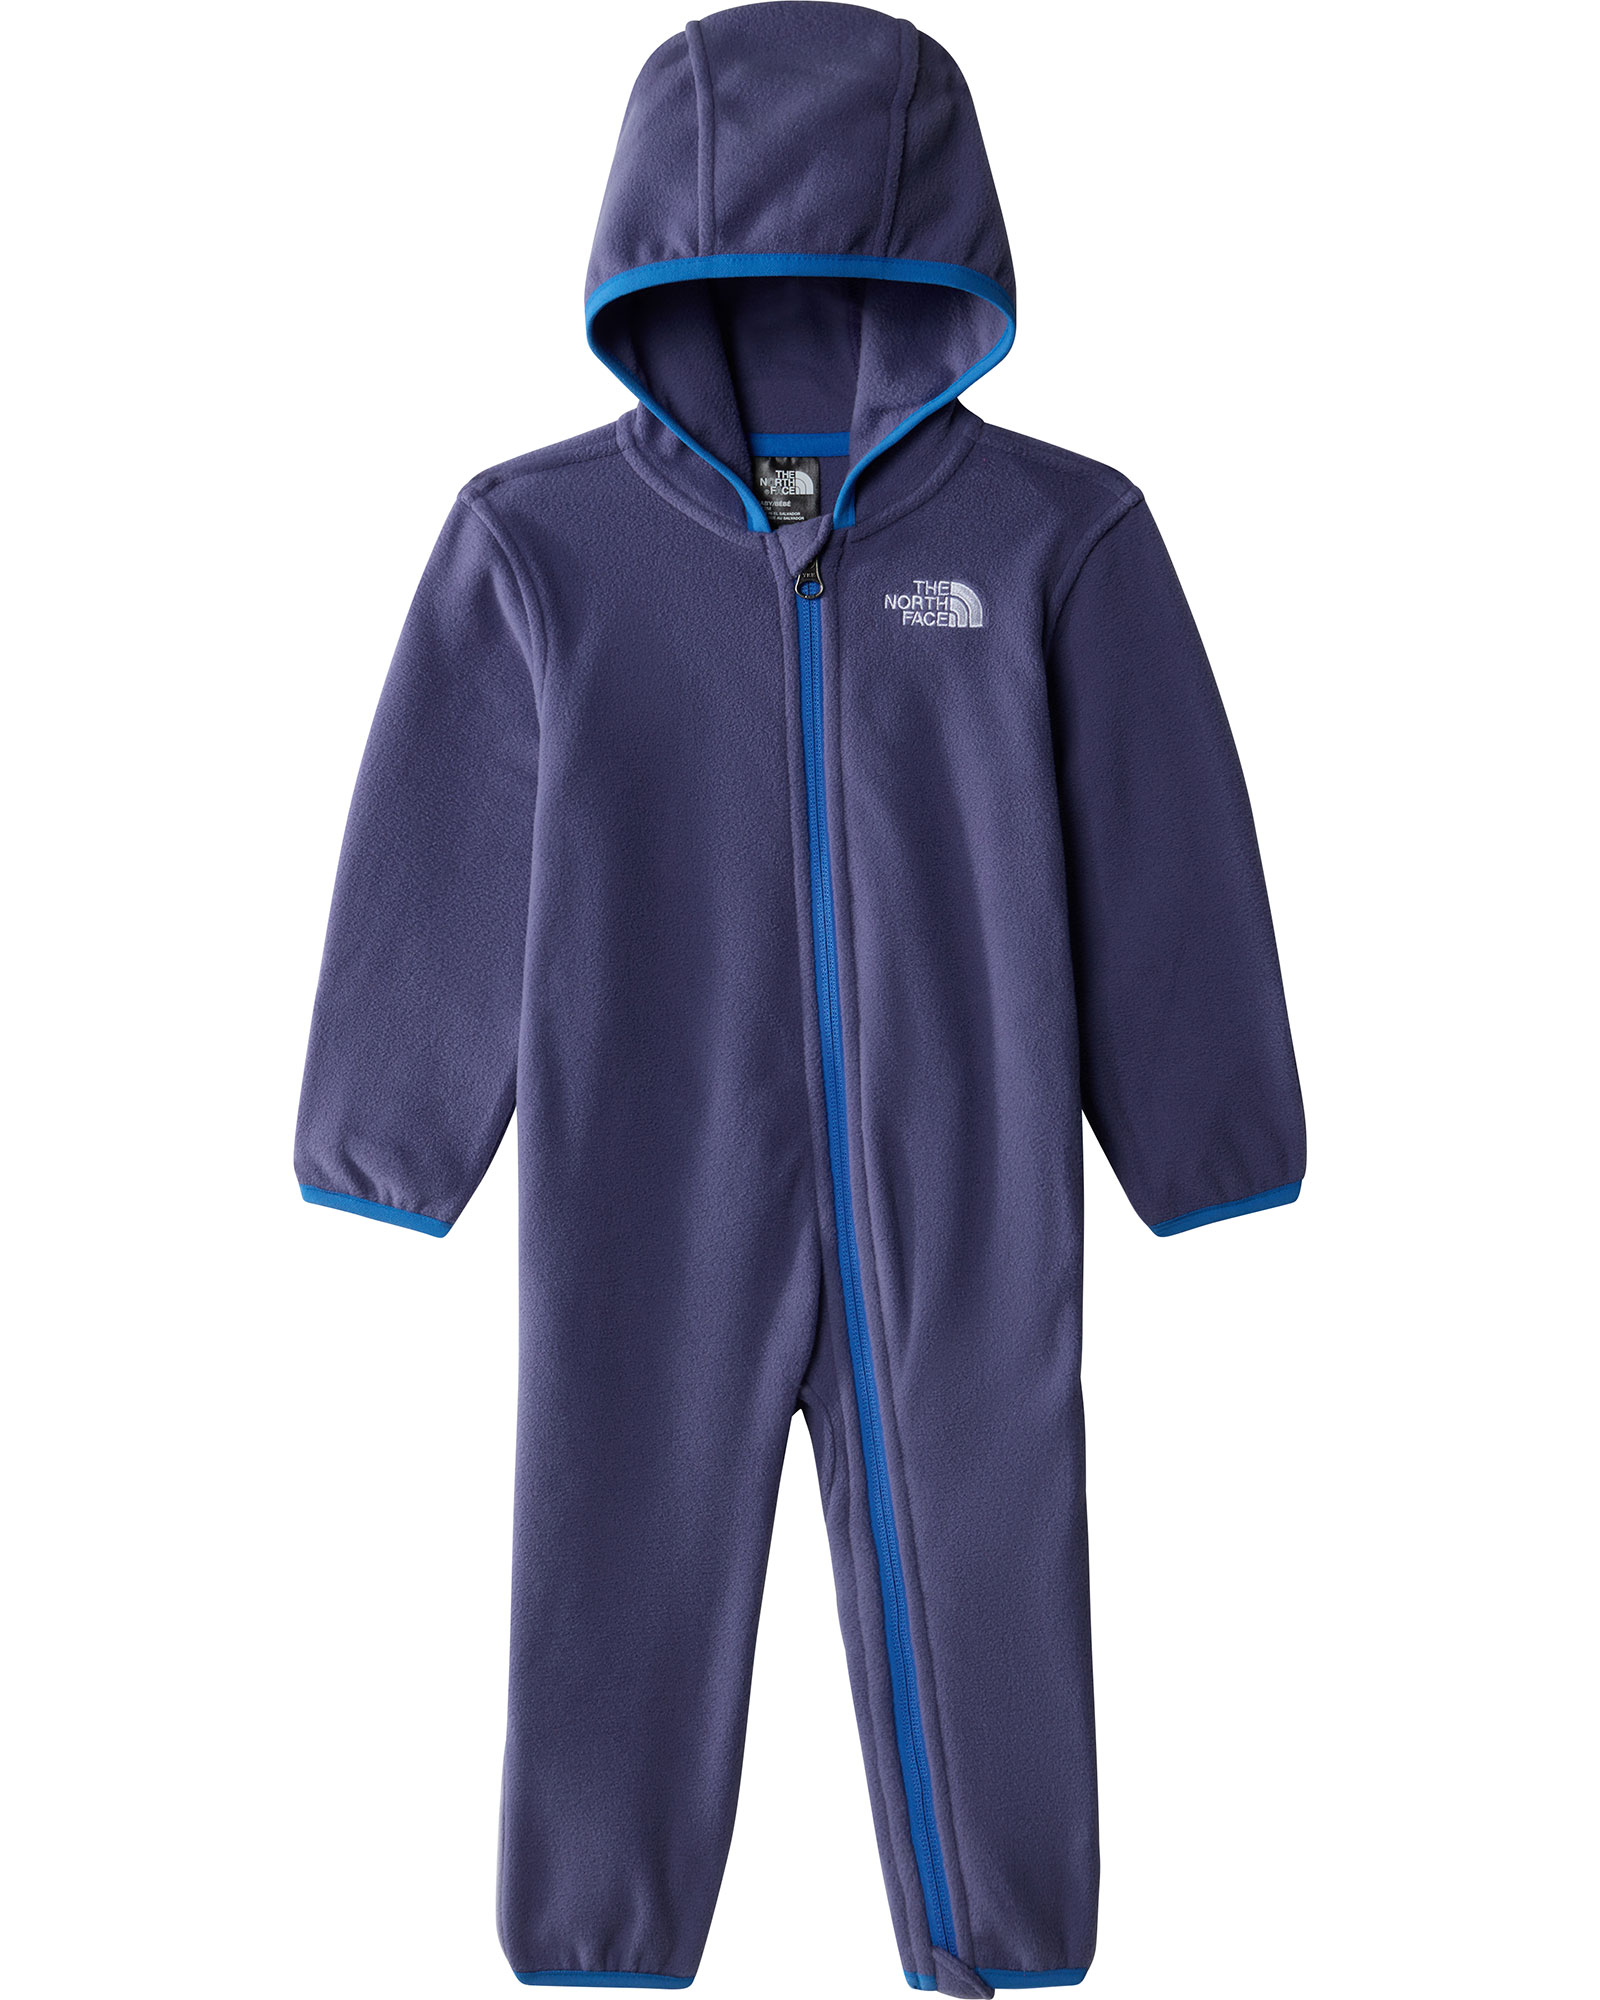 The North Face Baby Glacier One Piece - Cave Blue 12